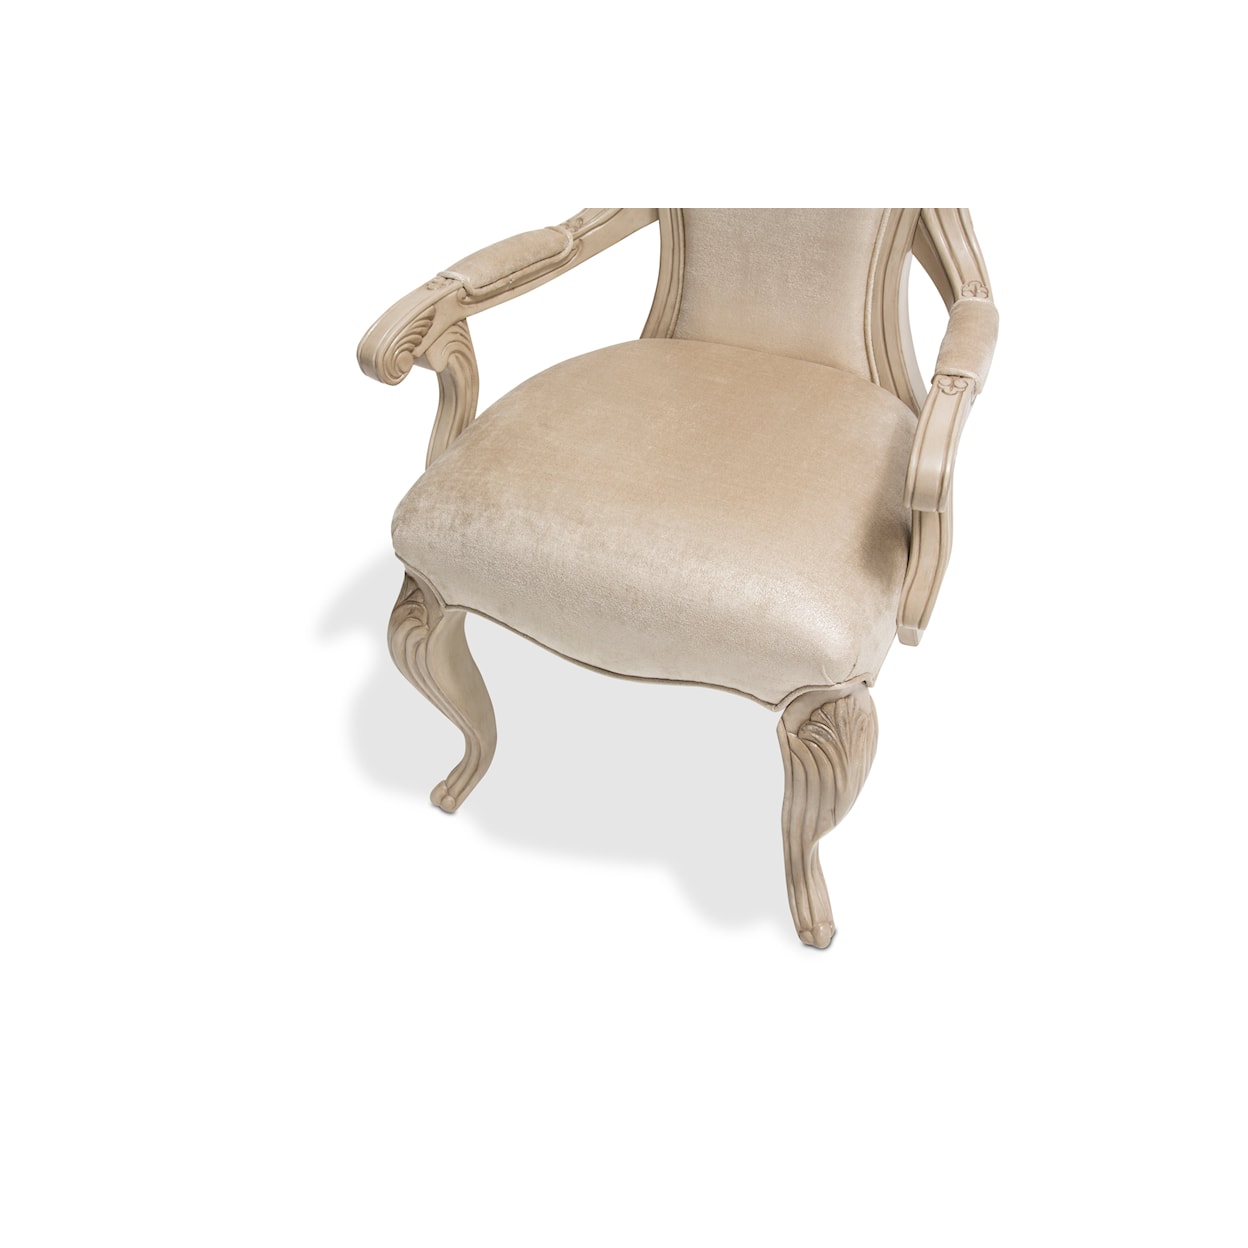 Michael Amini Platine de Royale Upholstered Arm Dining Chair